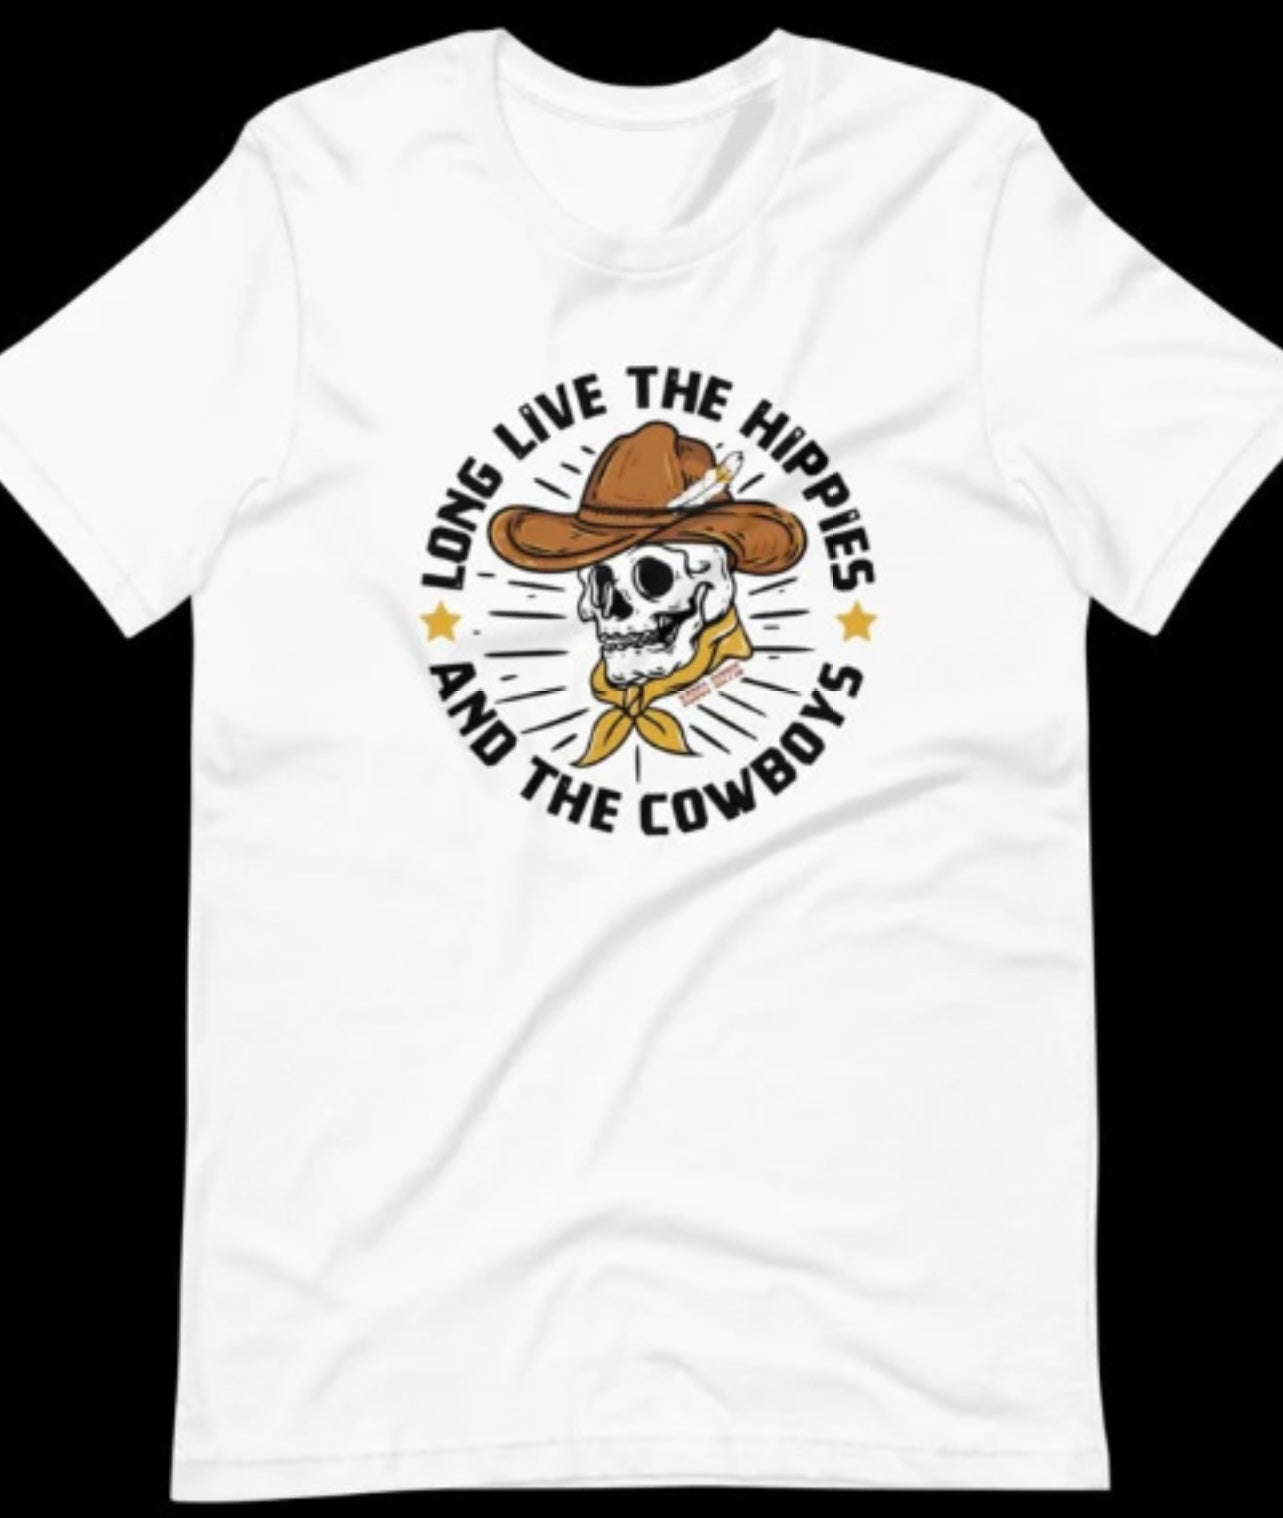 Long Live The Hippies And The Cowboys Tee